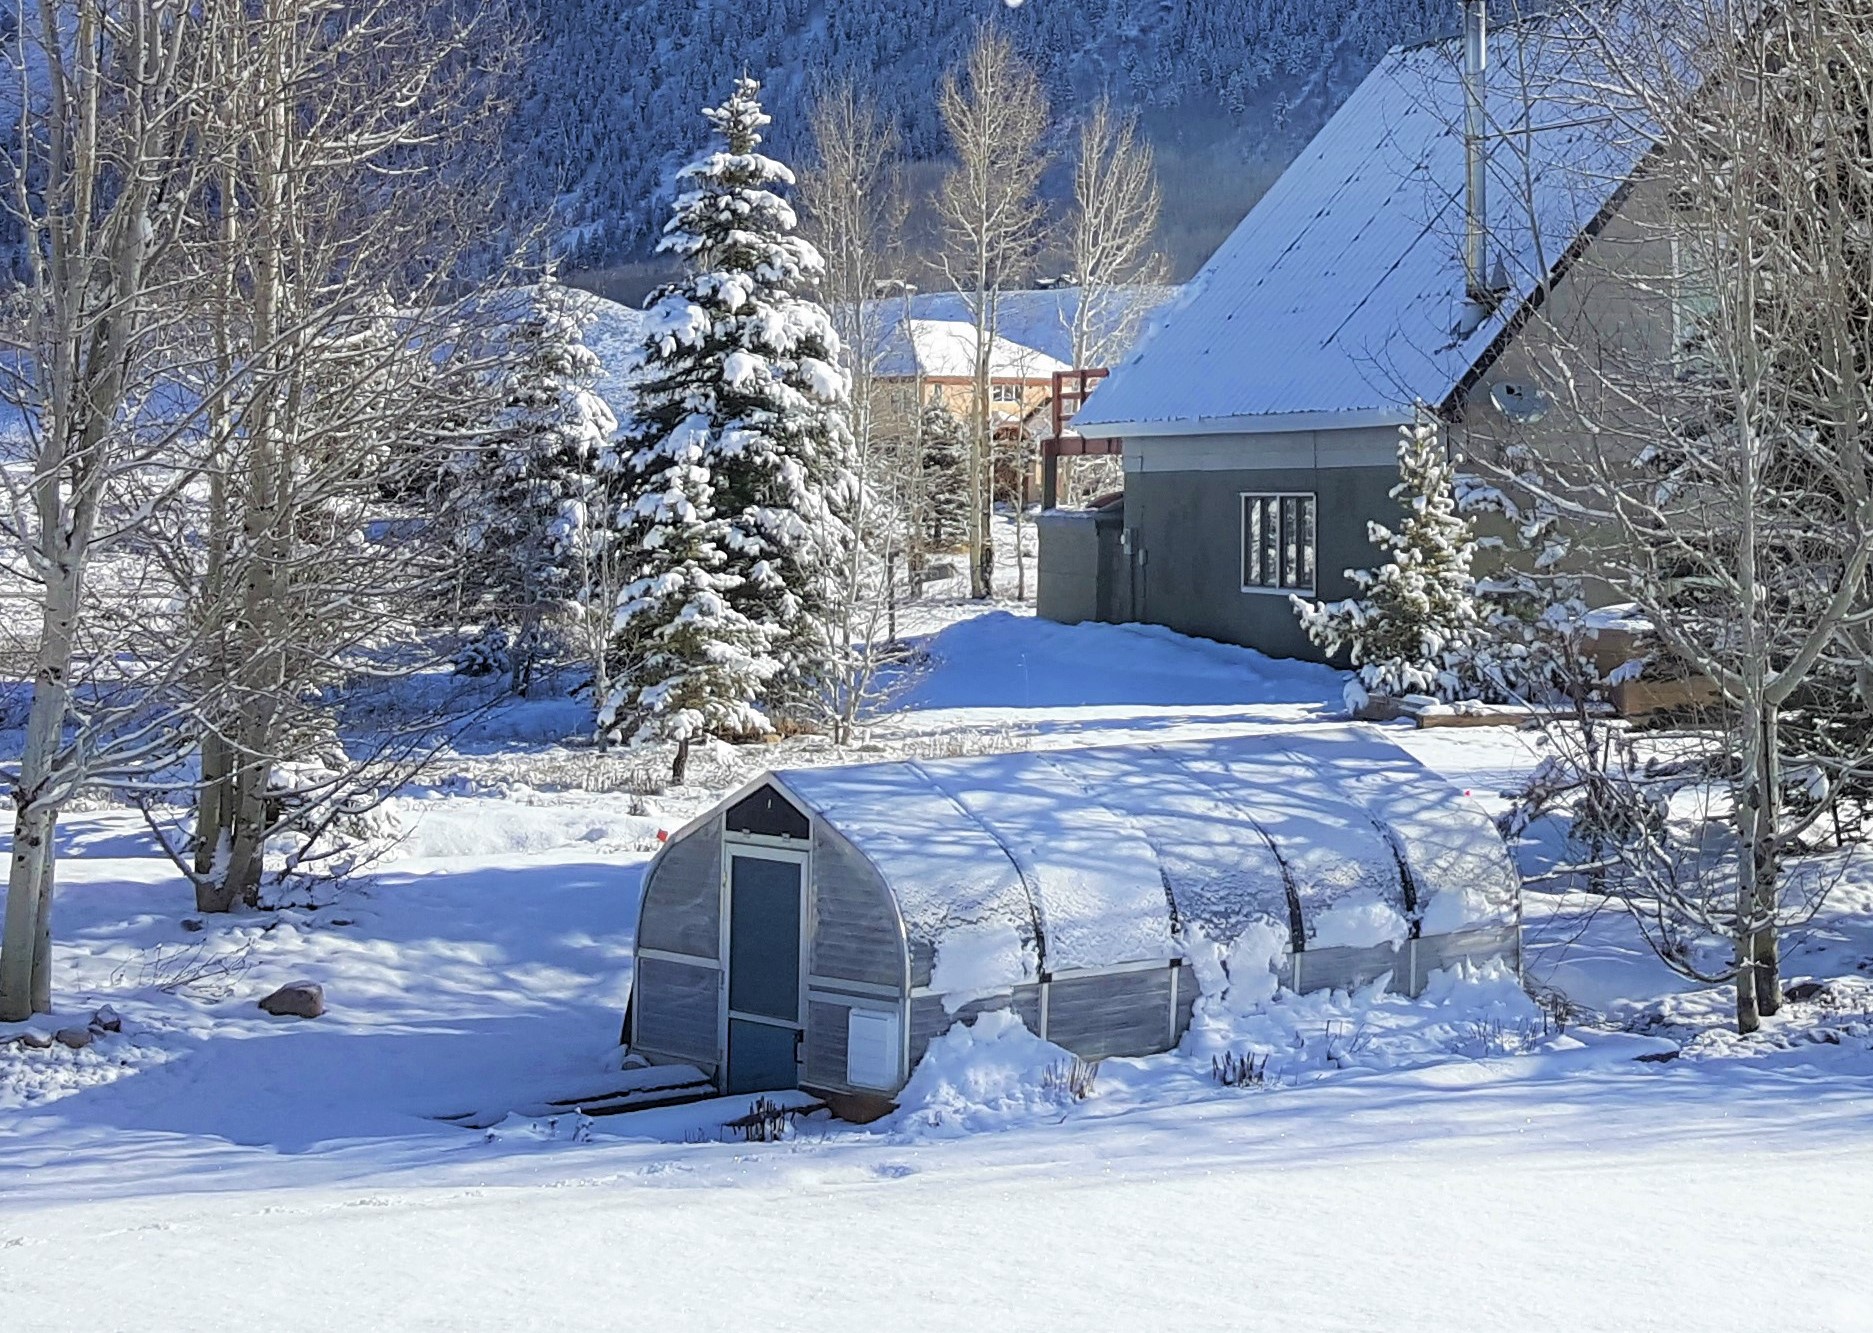 Sunglo Greenhouses are durable handling snow loads found in the mountains of Colorado